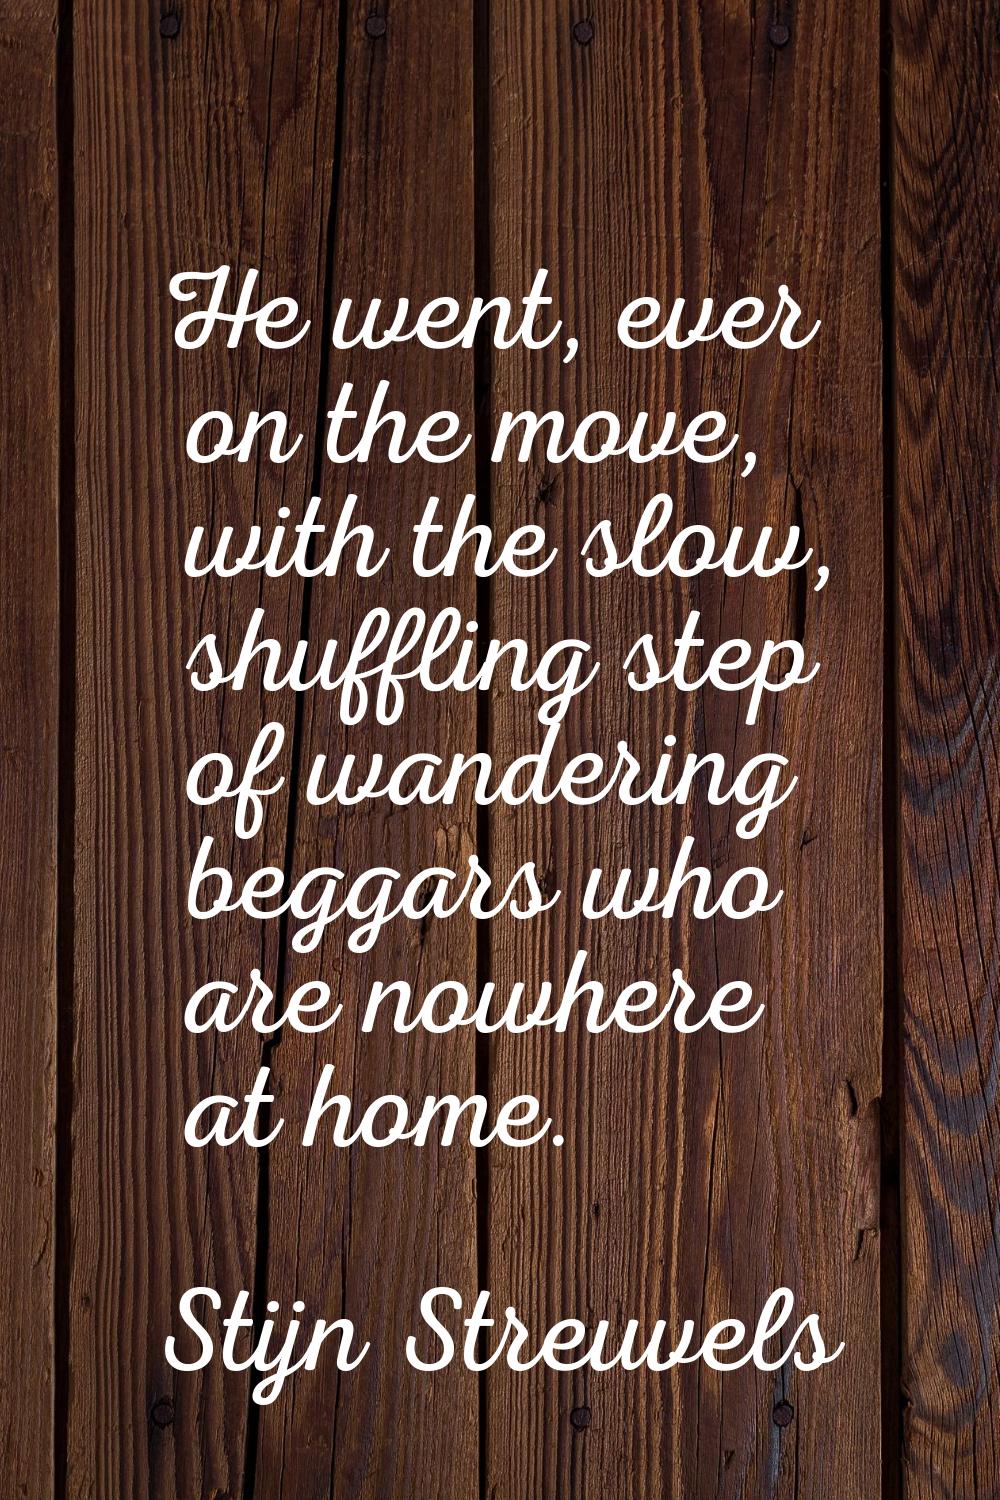 He went, ever on the move, with the slow, shuffling step of wandering beggars who are nowhere at ho